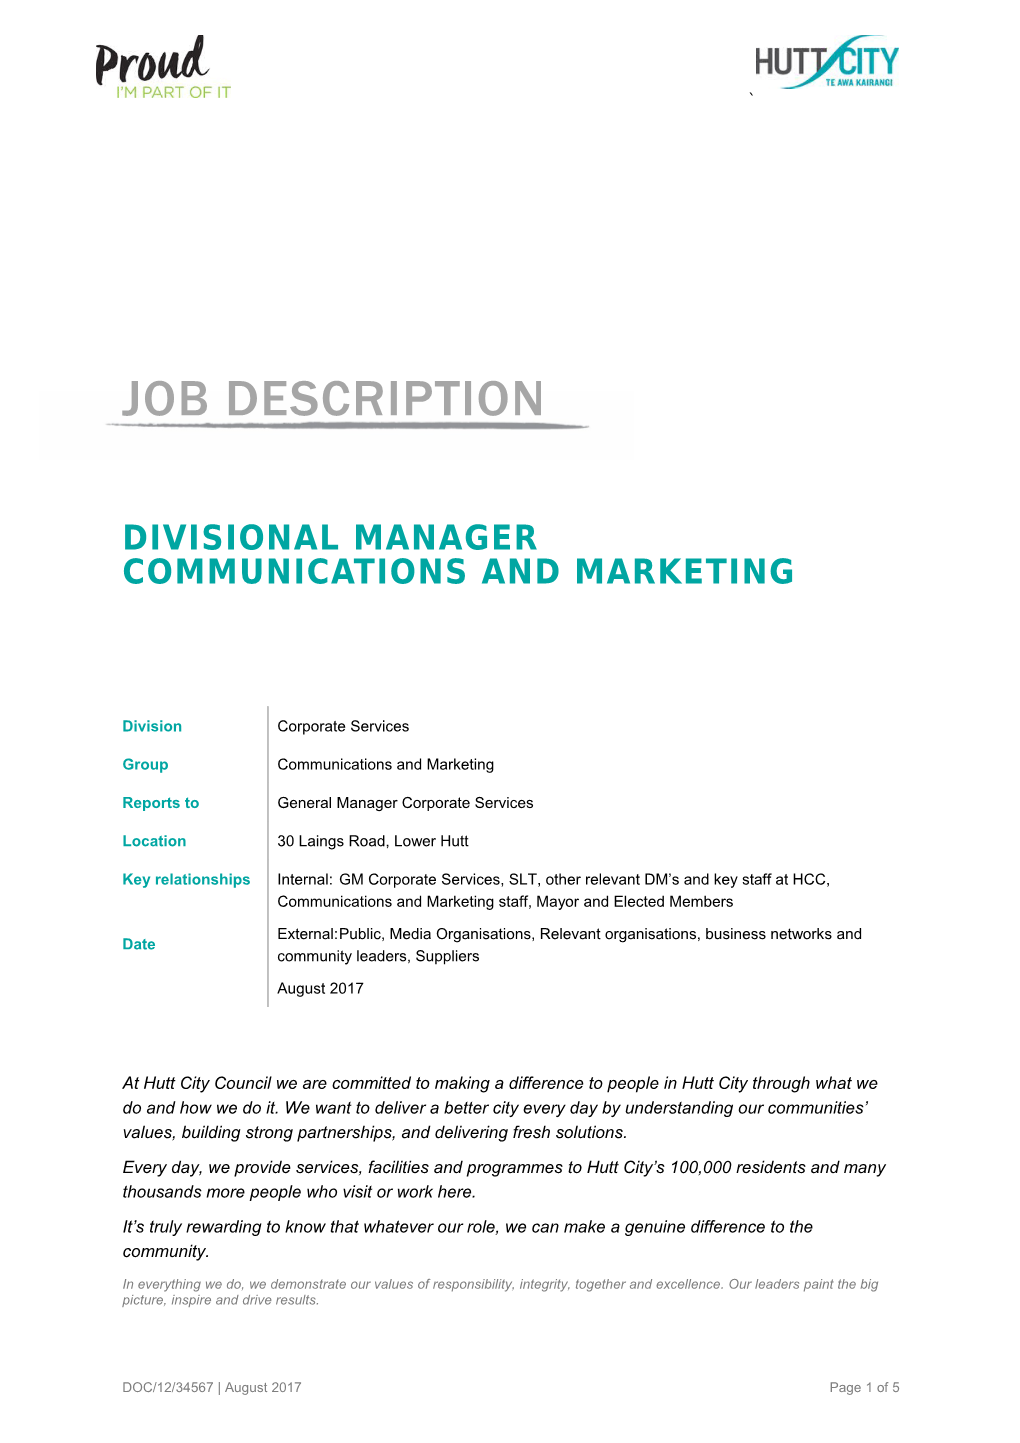 Divisional Manager Communications and Marketing